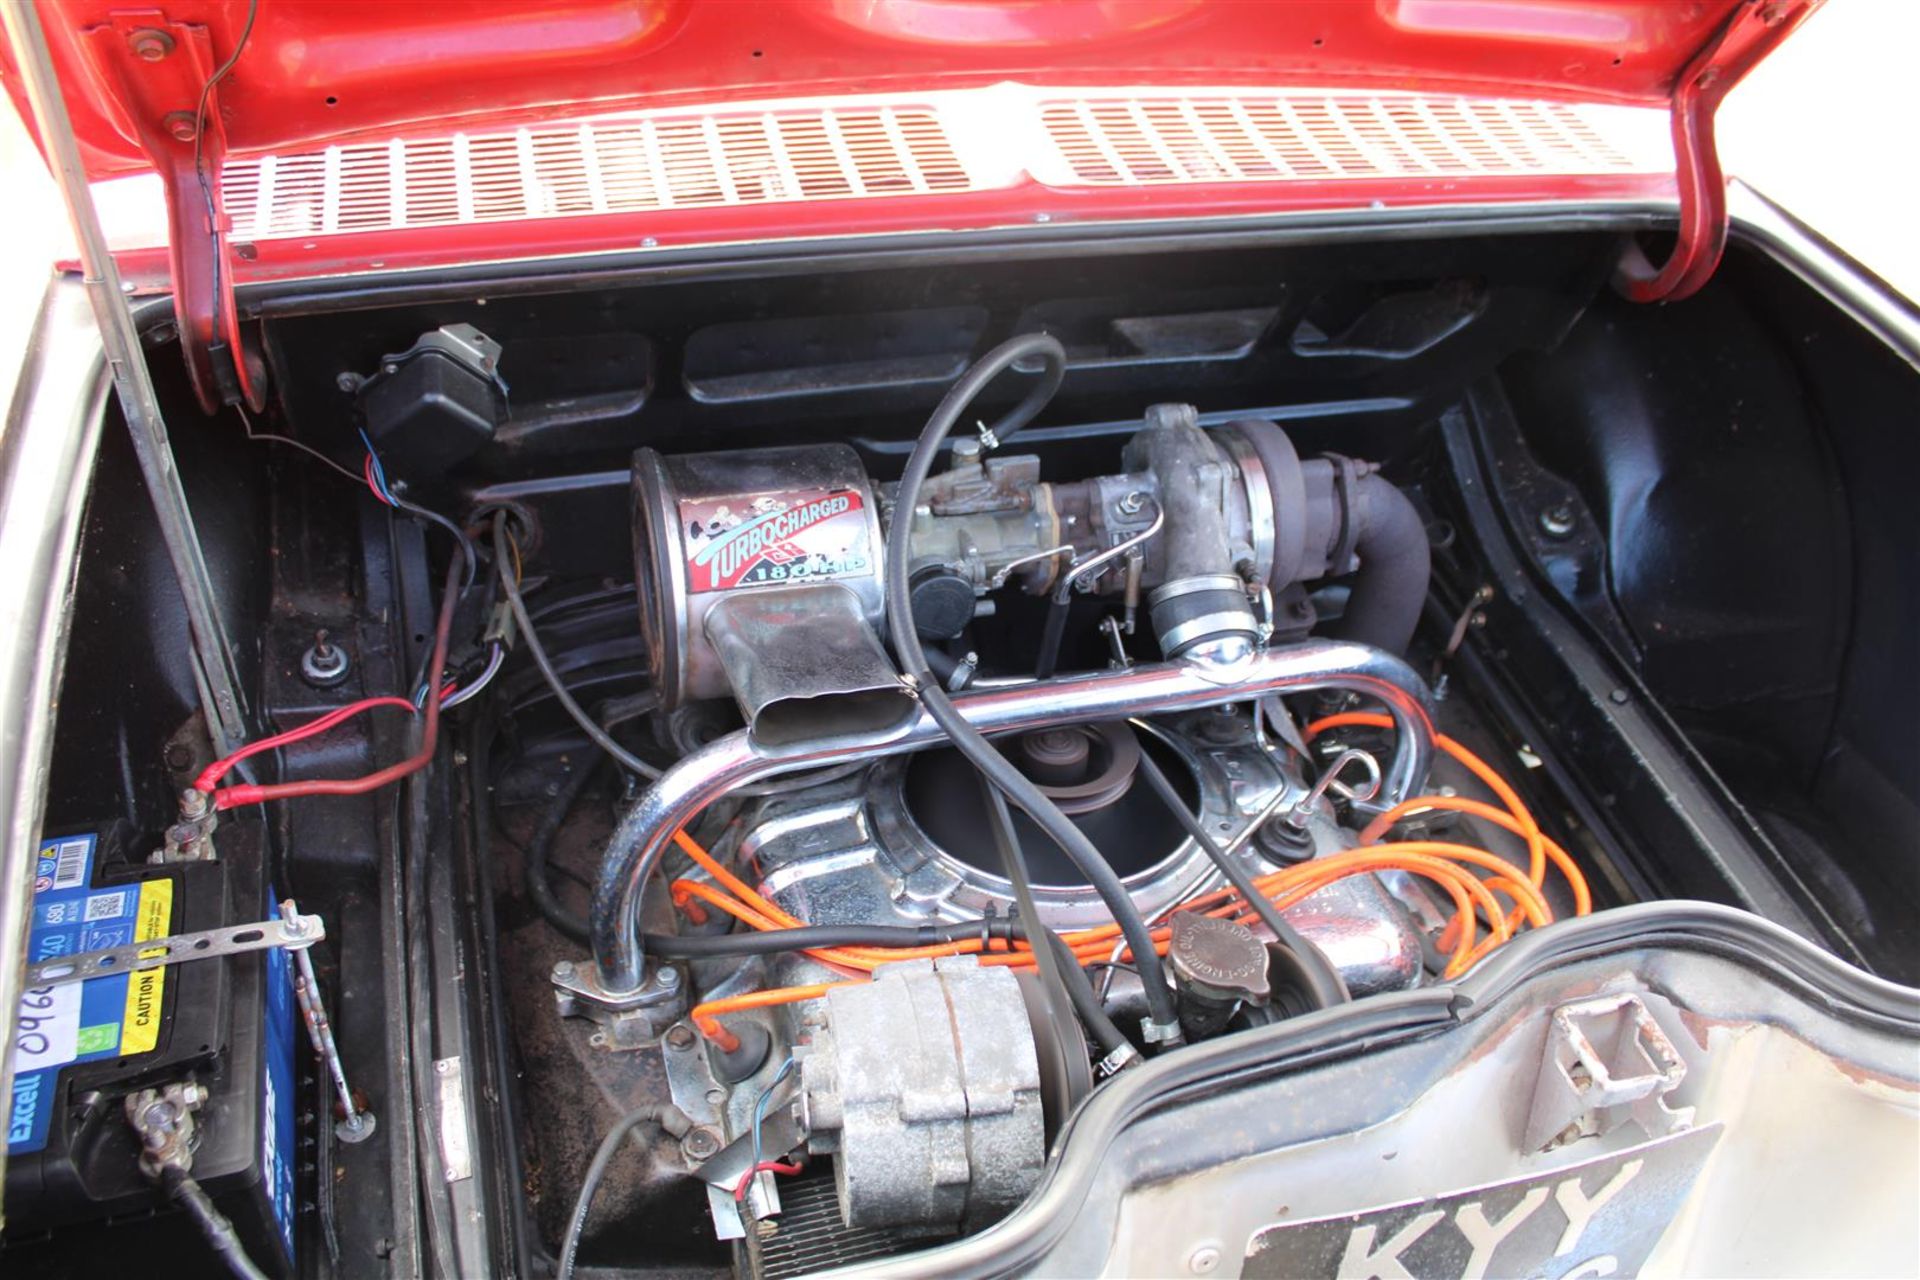 1965 Chevrolet Corvair Corsa Coupe 180HP Turbo LHD - Image 11 of 16